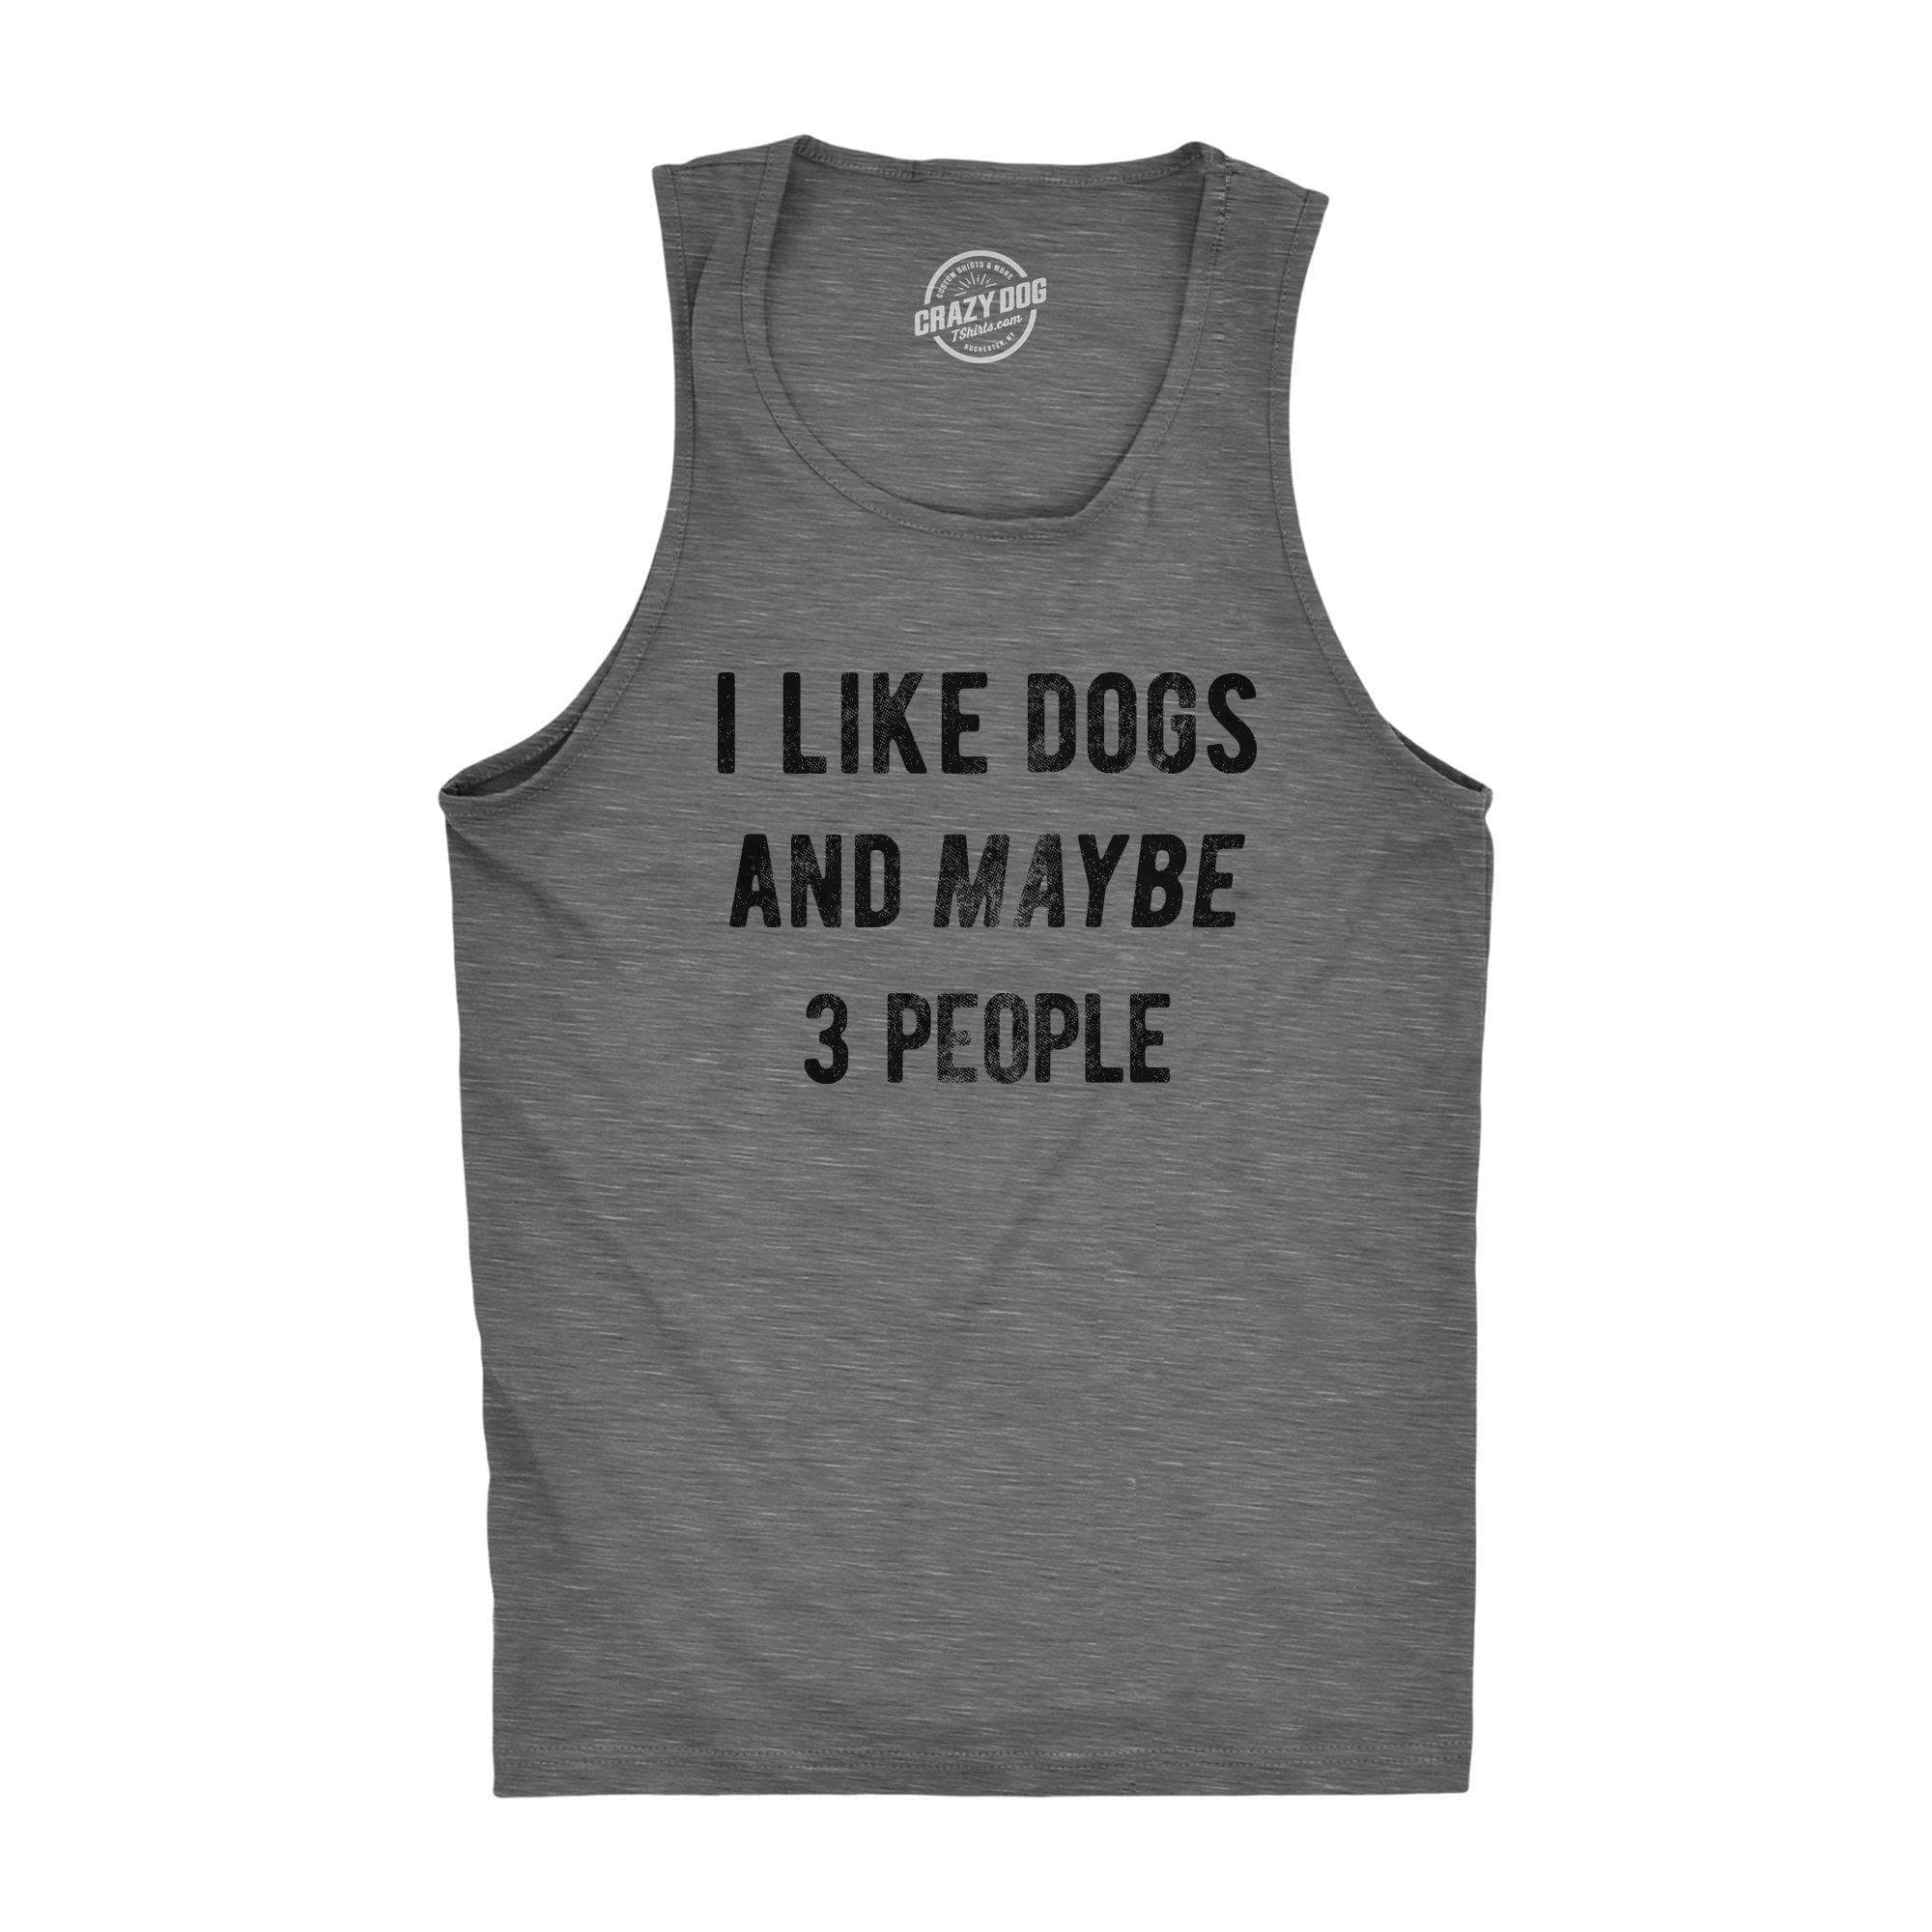 I Like Dogs And Maybe 3 People Men's Tank Top - Crazy Dog T-Shirts